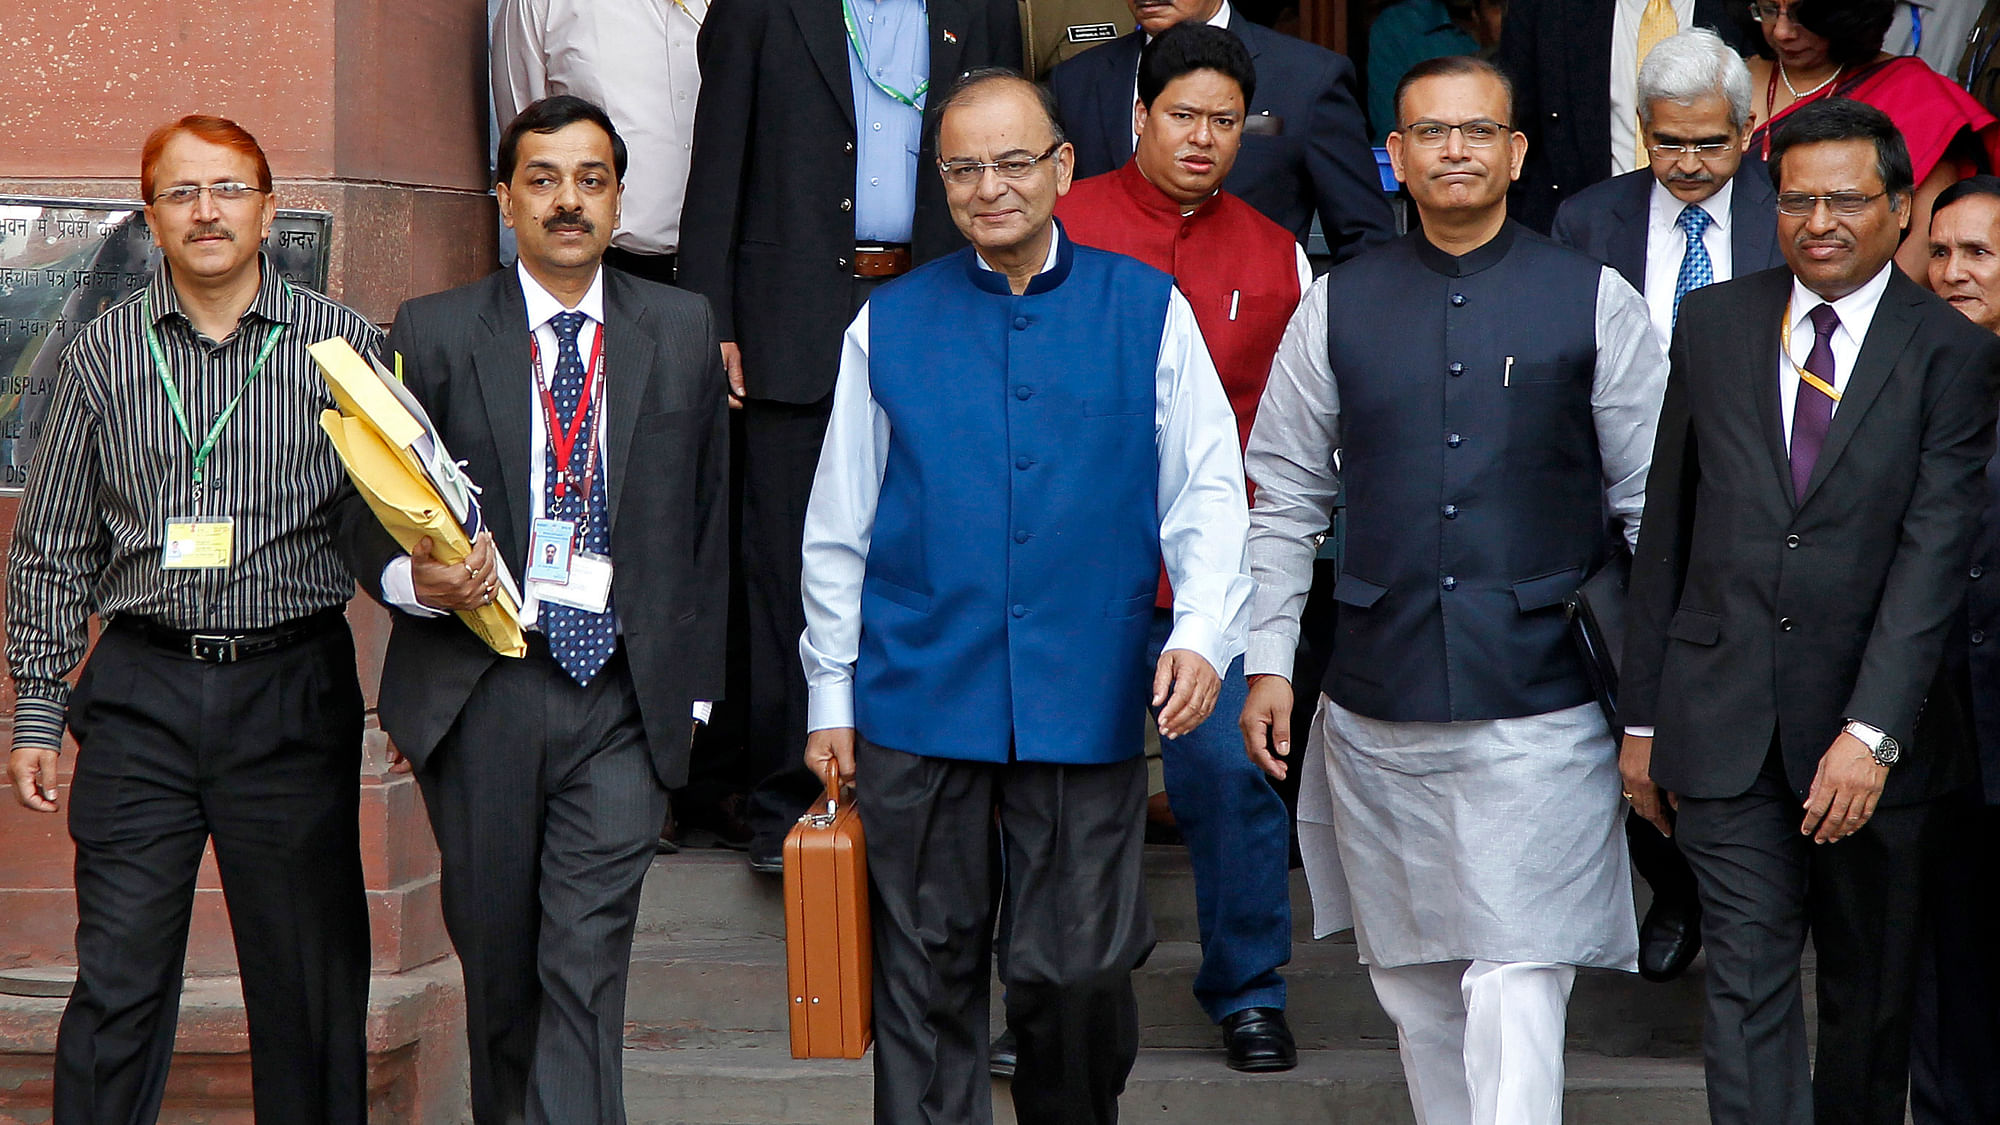 File photo of Finance Minister Arun Jaitley (centre) and MoS Finance Jayant Sinha (second from right). (Photo: Reuters)